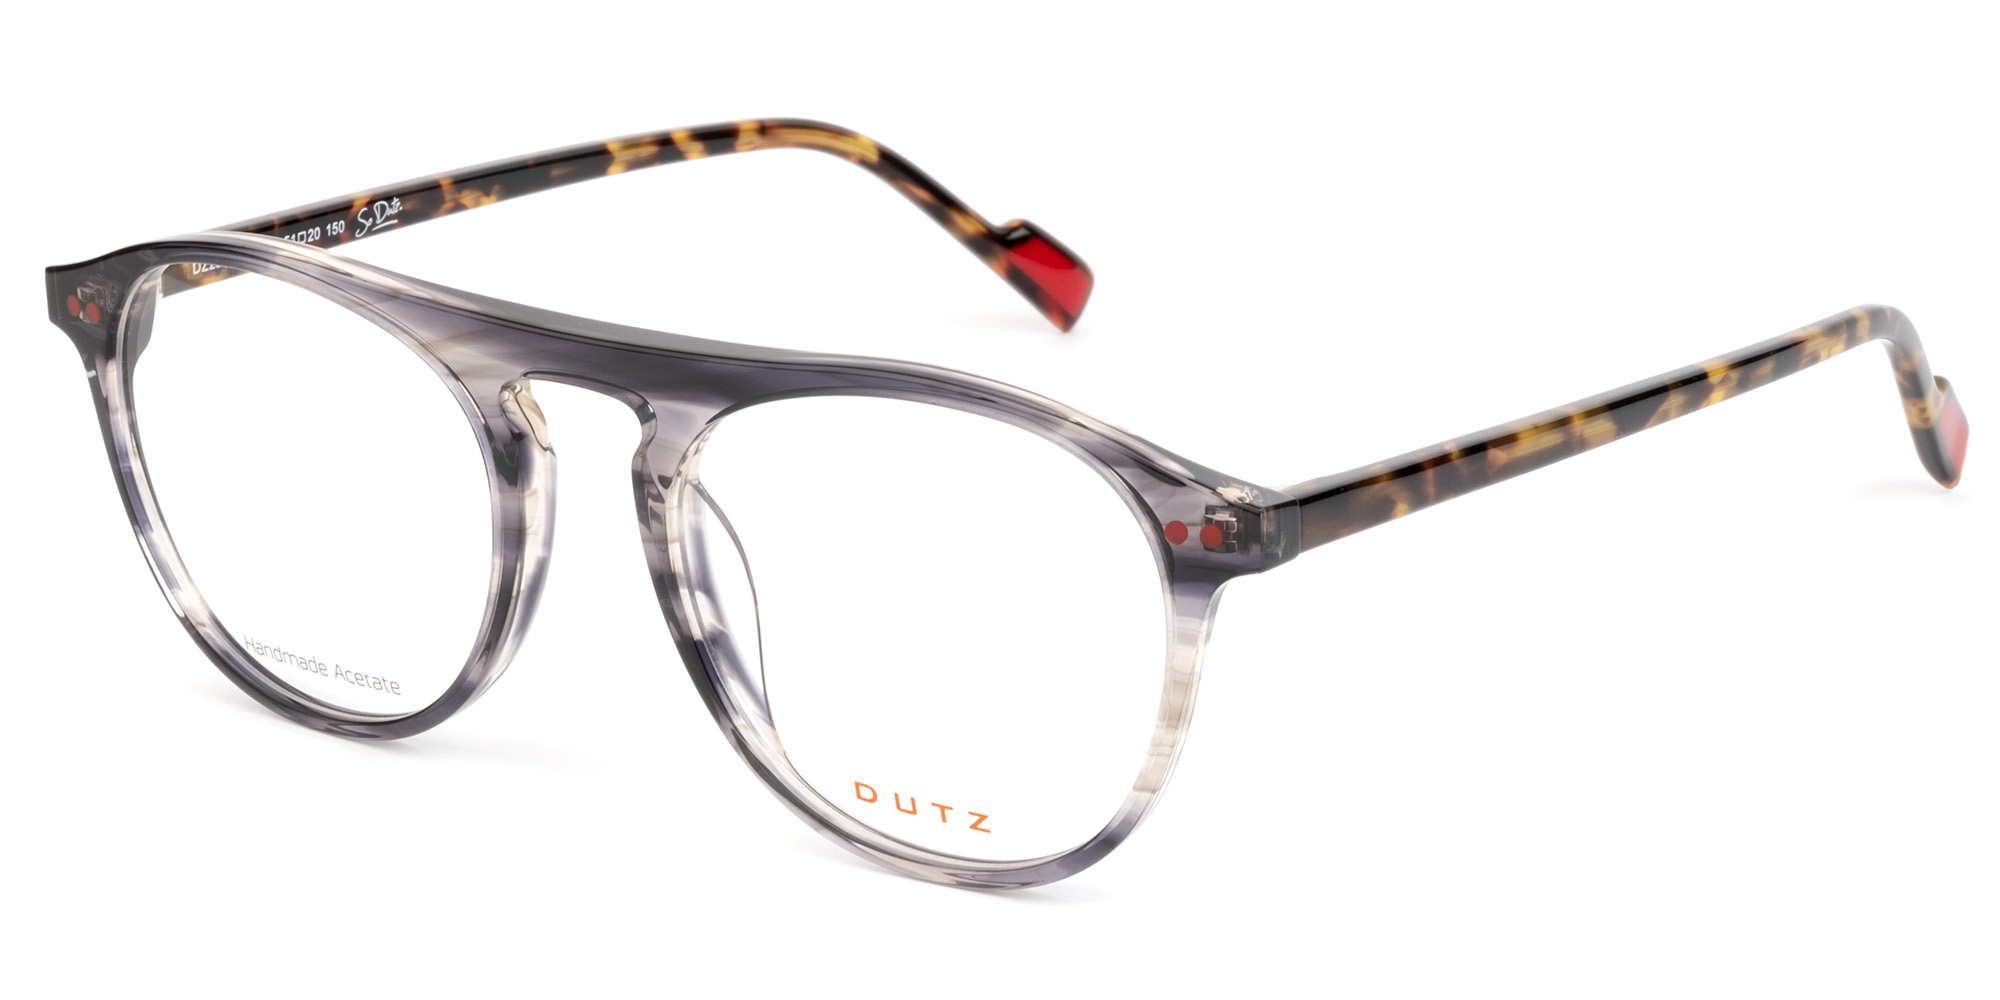 Bi-color, grey combined with discreet red, acetate frame and brown tartaruga temples